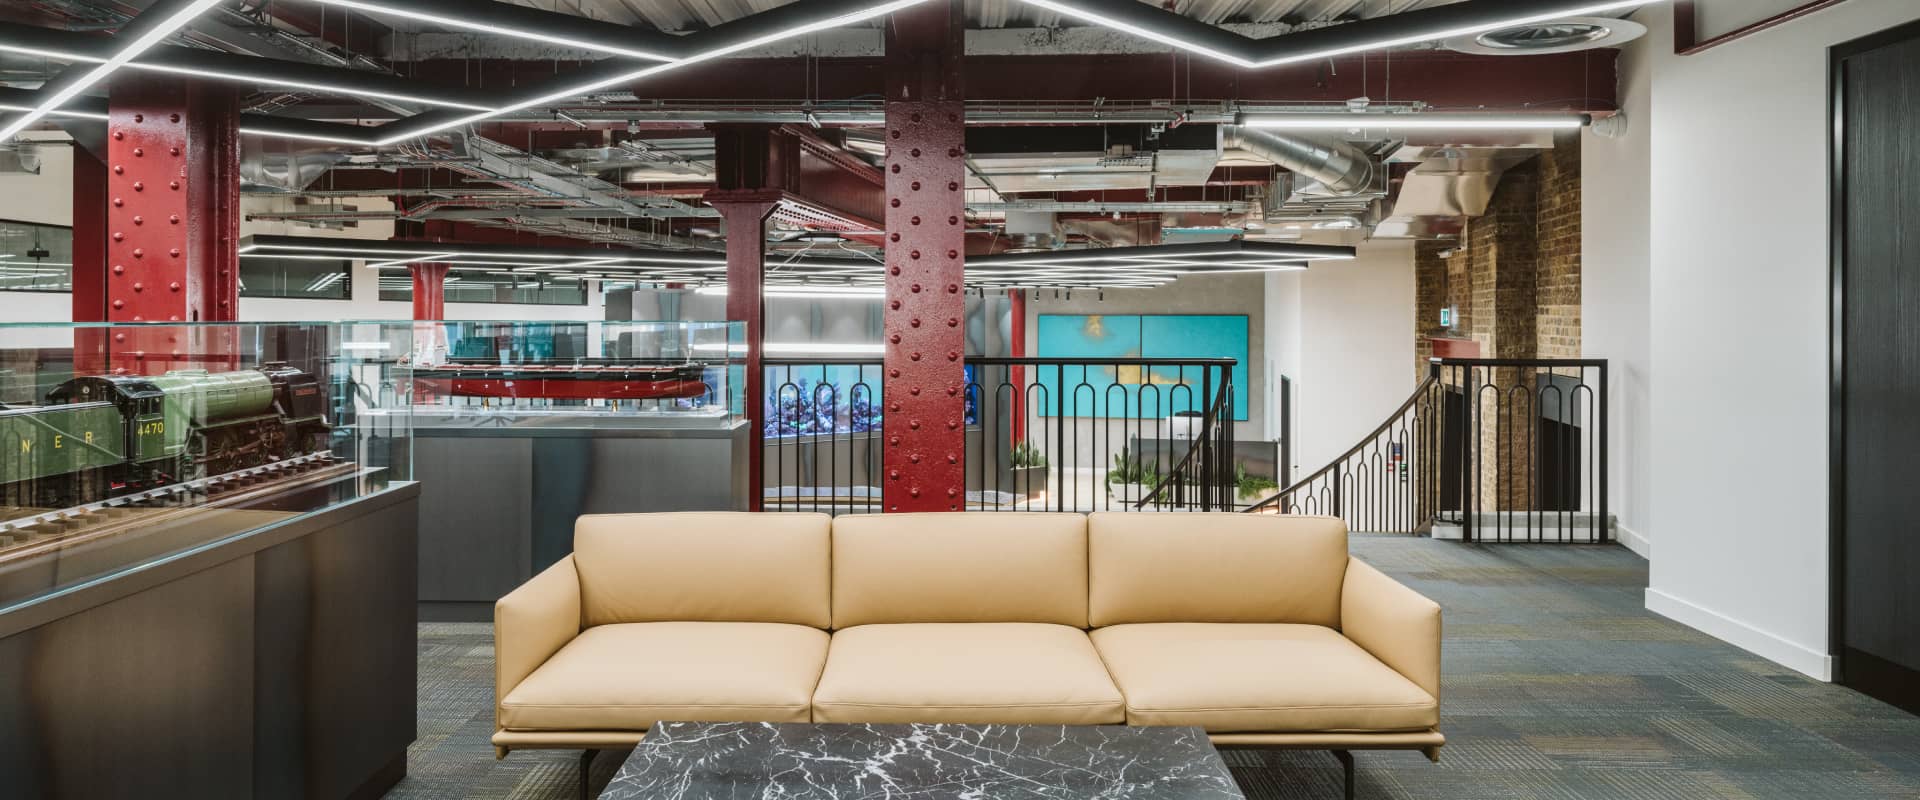 premium and modern office fit out for Javelin London by Cleo workspace design & build